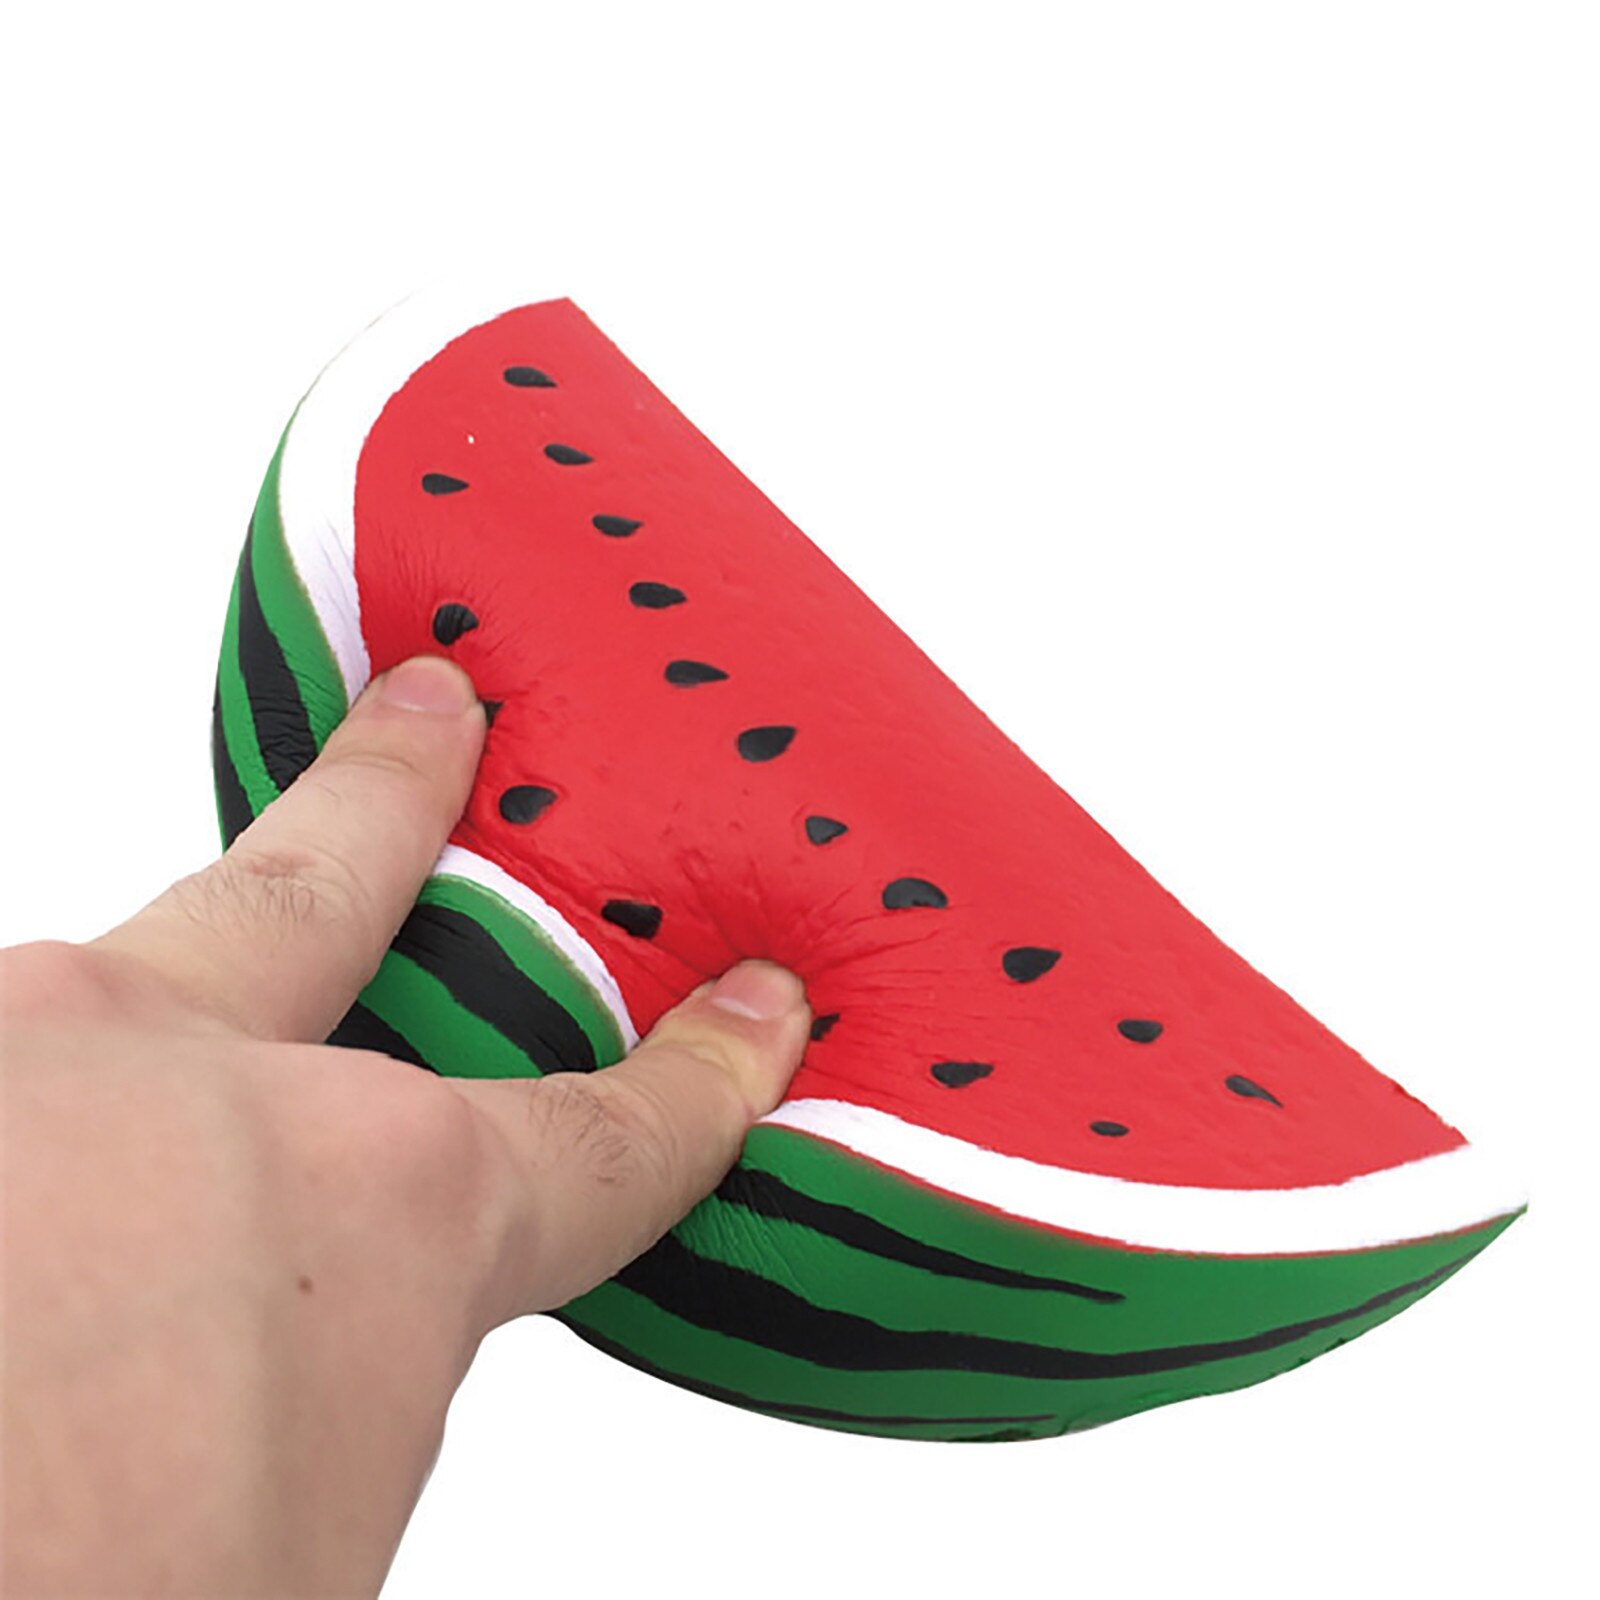 14-17cm Antistress Simulation Soft Watermelon Squeeze Fidget Toys Slow Rising Stress Reliever Toy Slow Rebound Funny Kids Gifts